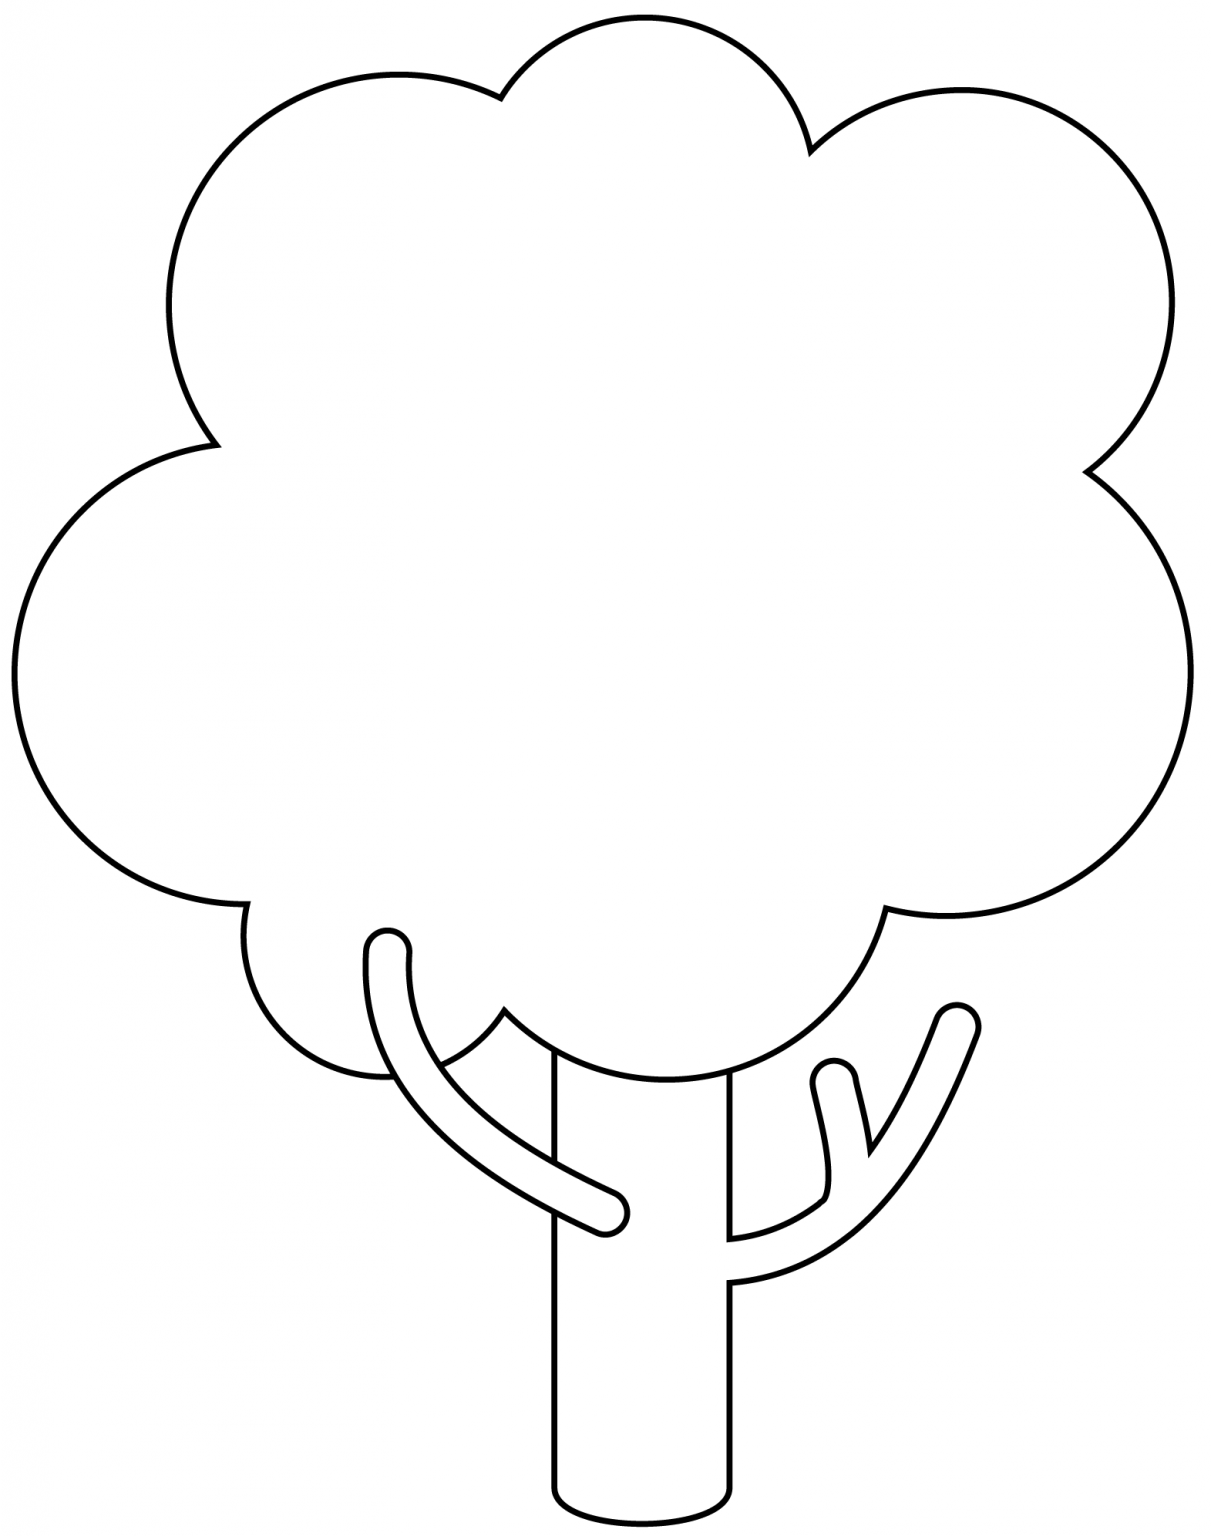 Deciduous Tree Emoji coloring page - ColouringPages